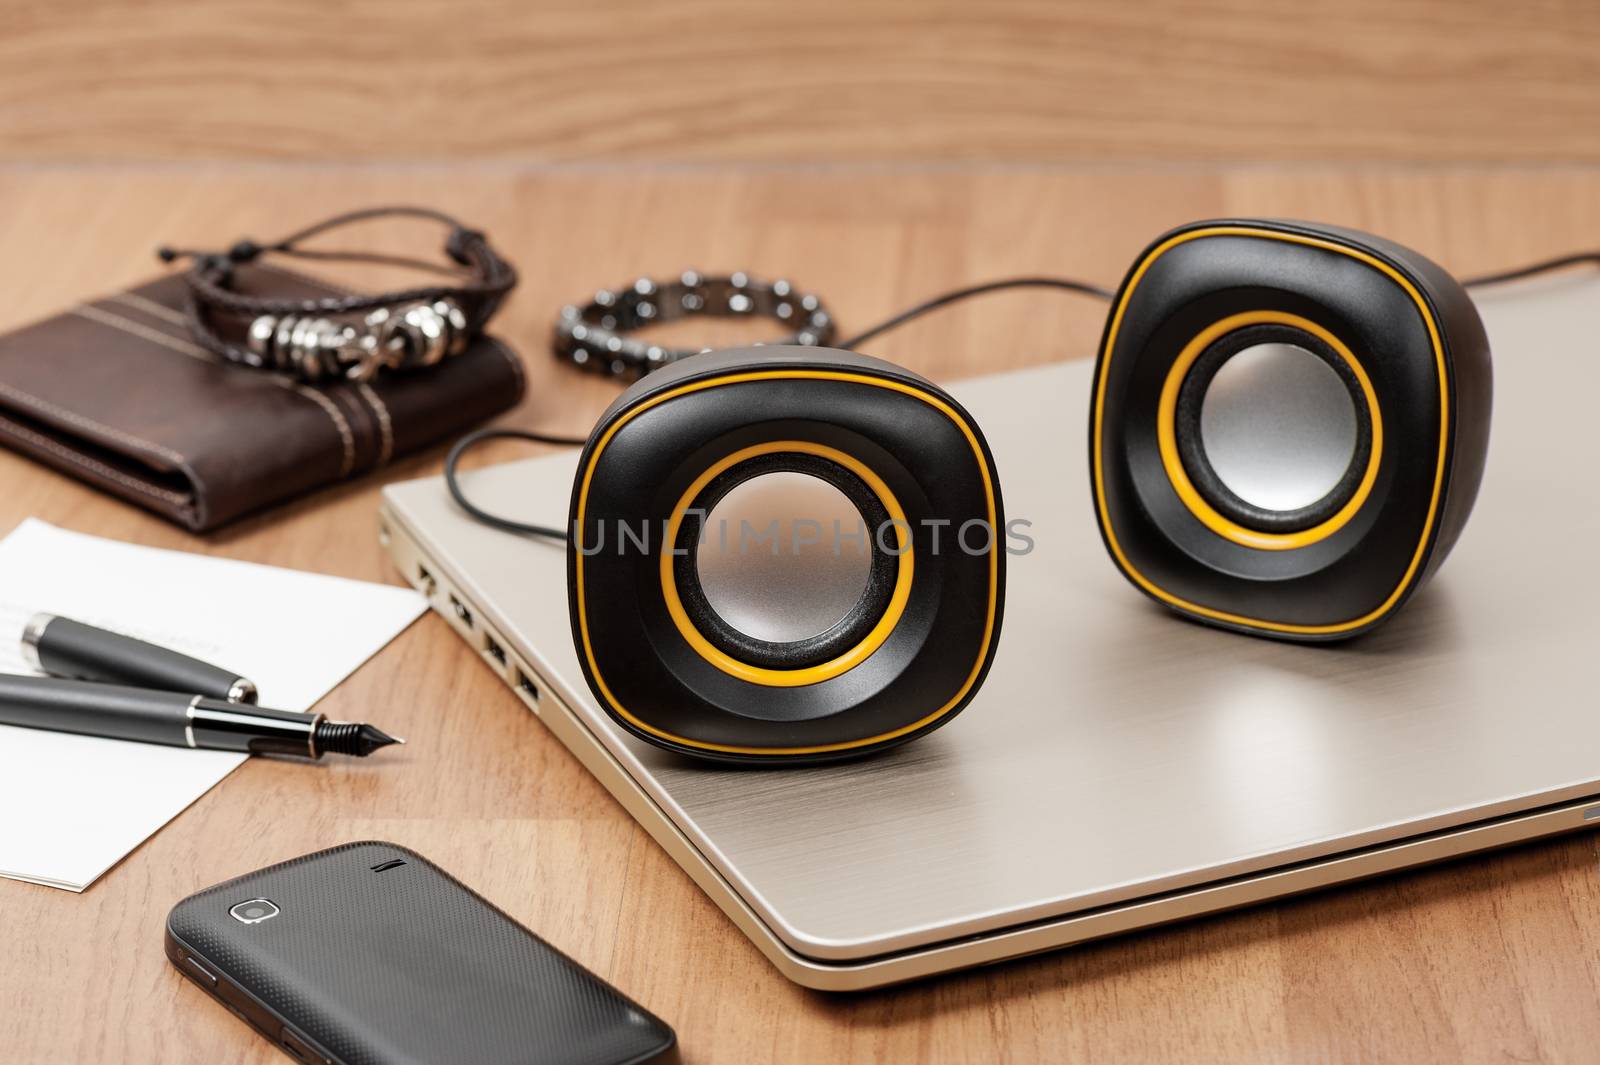 mini USB stereo speakers for laptop and PC.